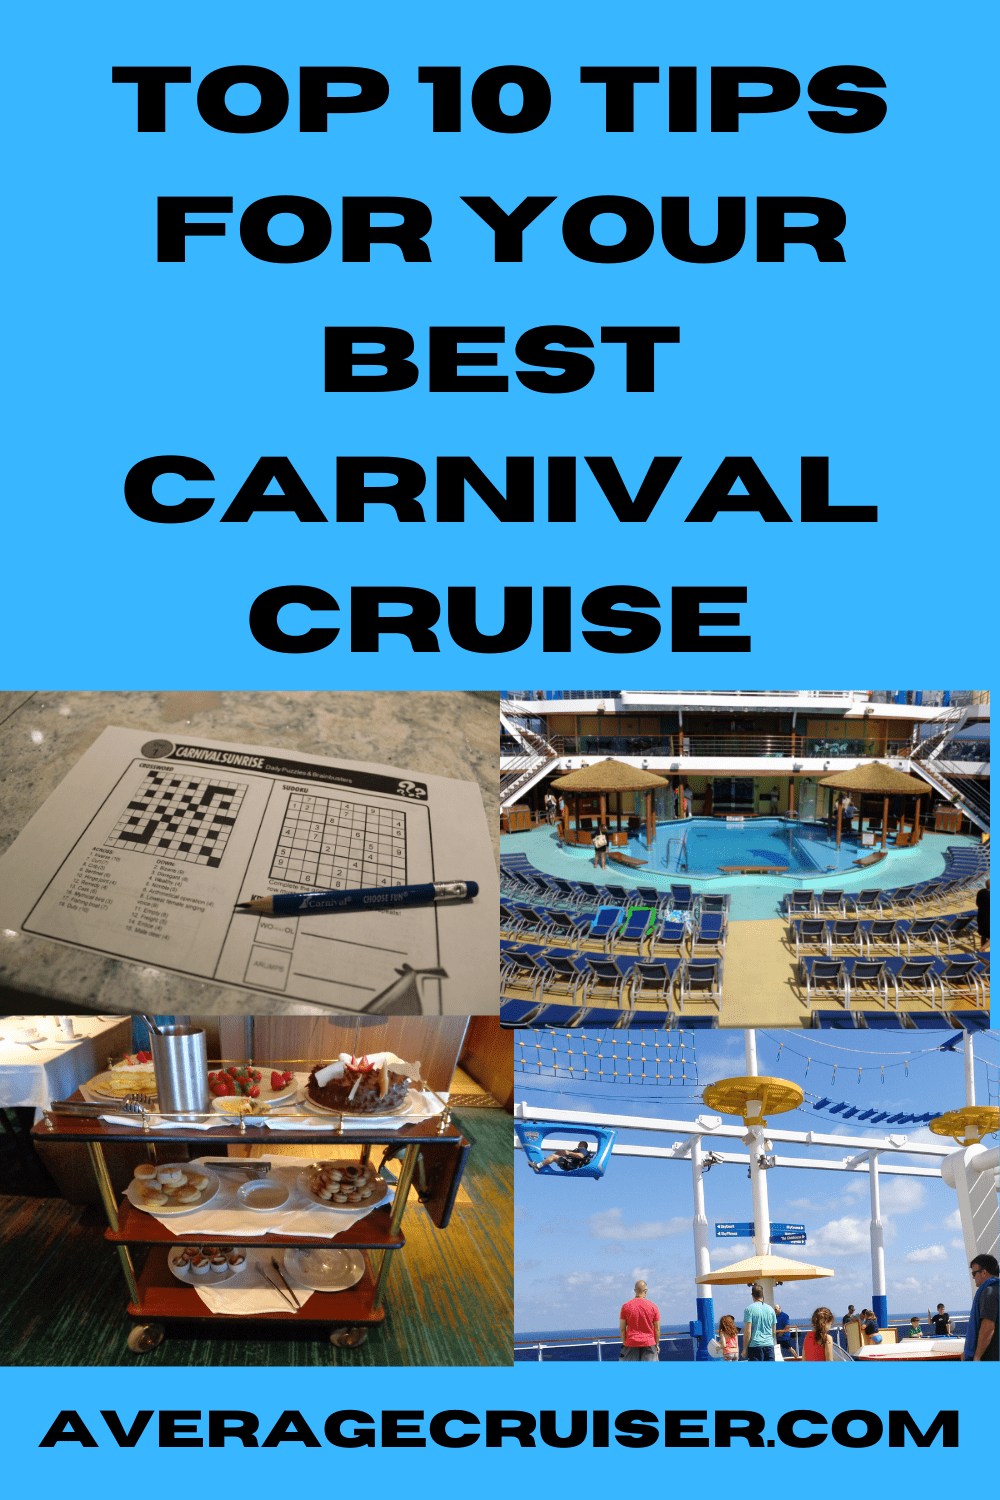 first time cruise tips carnival